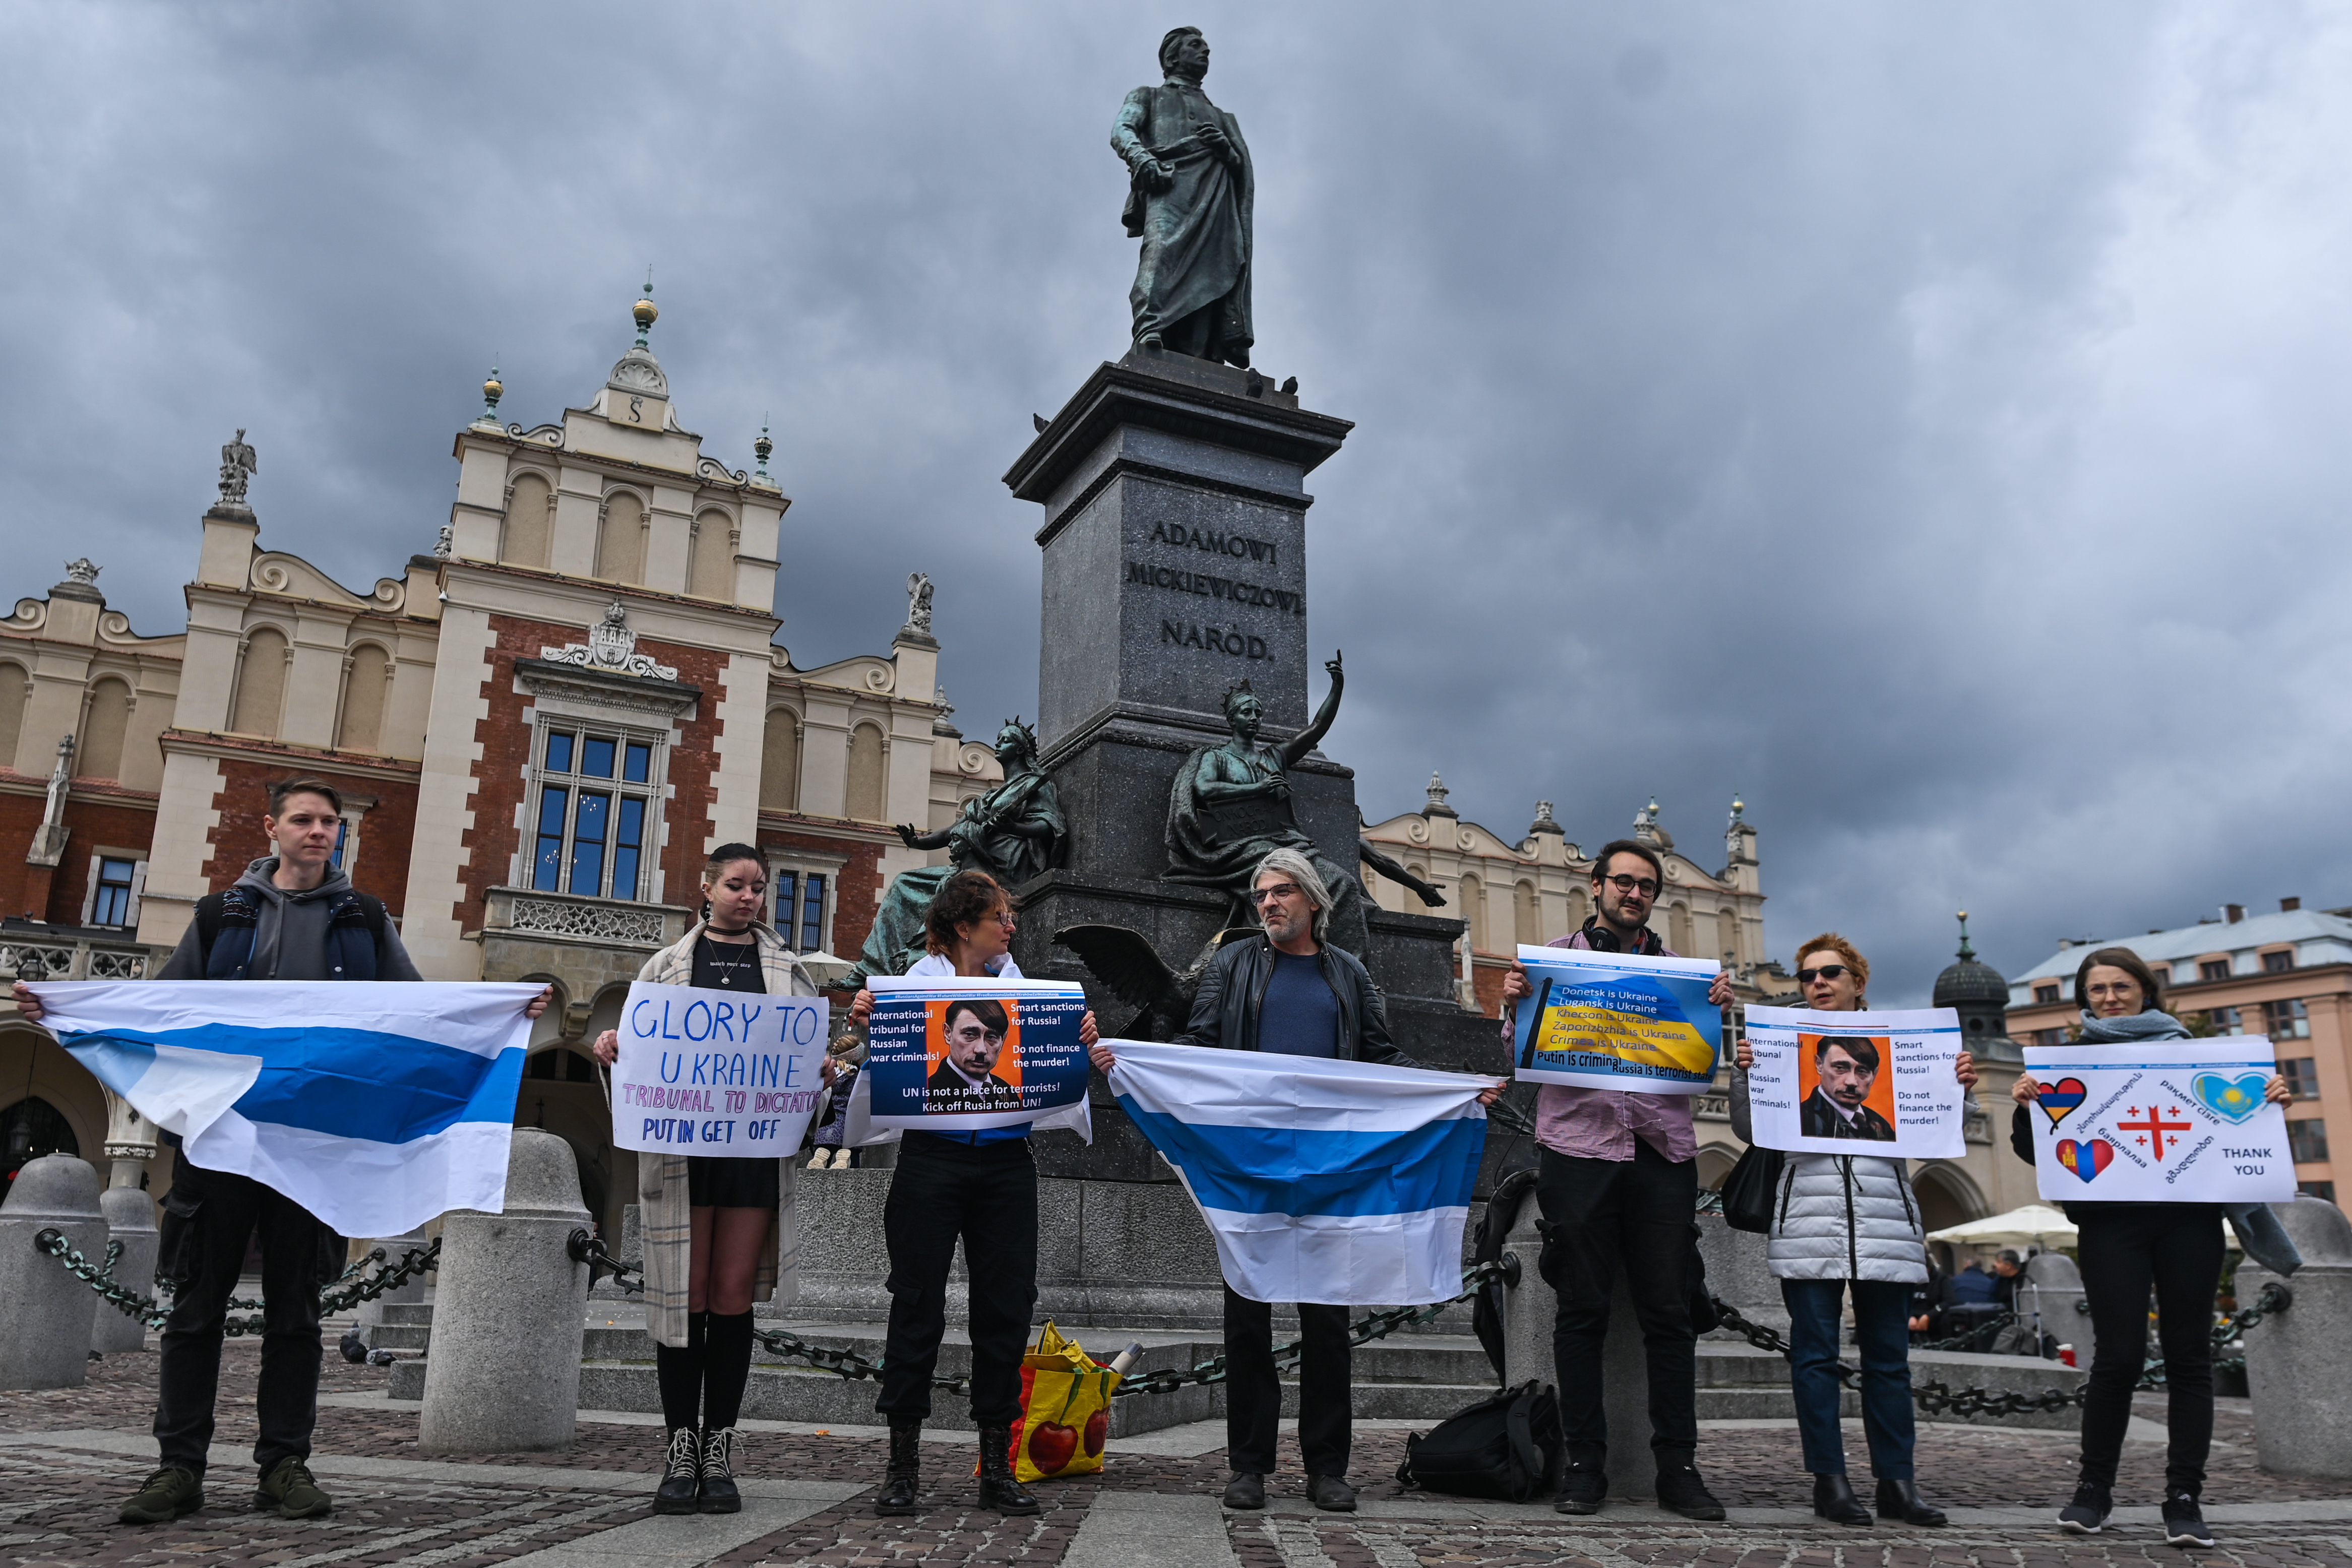 Members of the local Russian diaspora in Krakow during a silent anti-war demonstration and protest against Vladimir Putin and the war with Ukraine, 2 October 2022. © Artur Widak/NurPhoto via Reuters